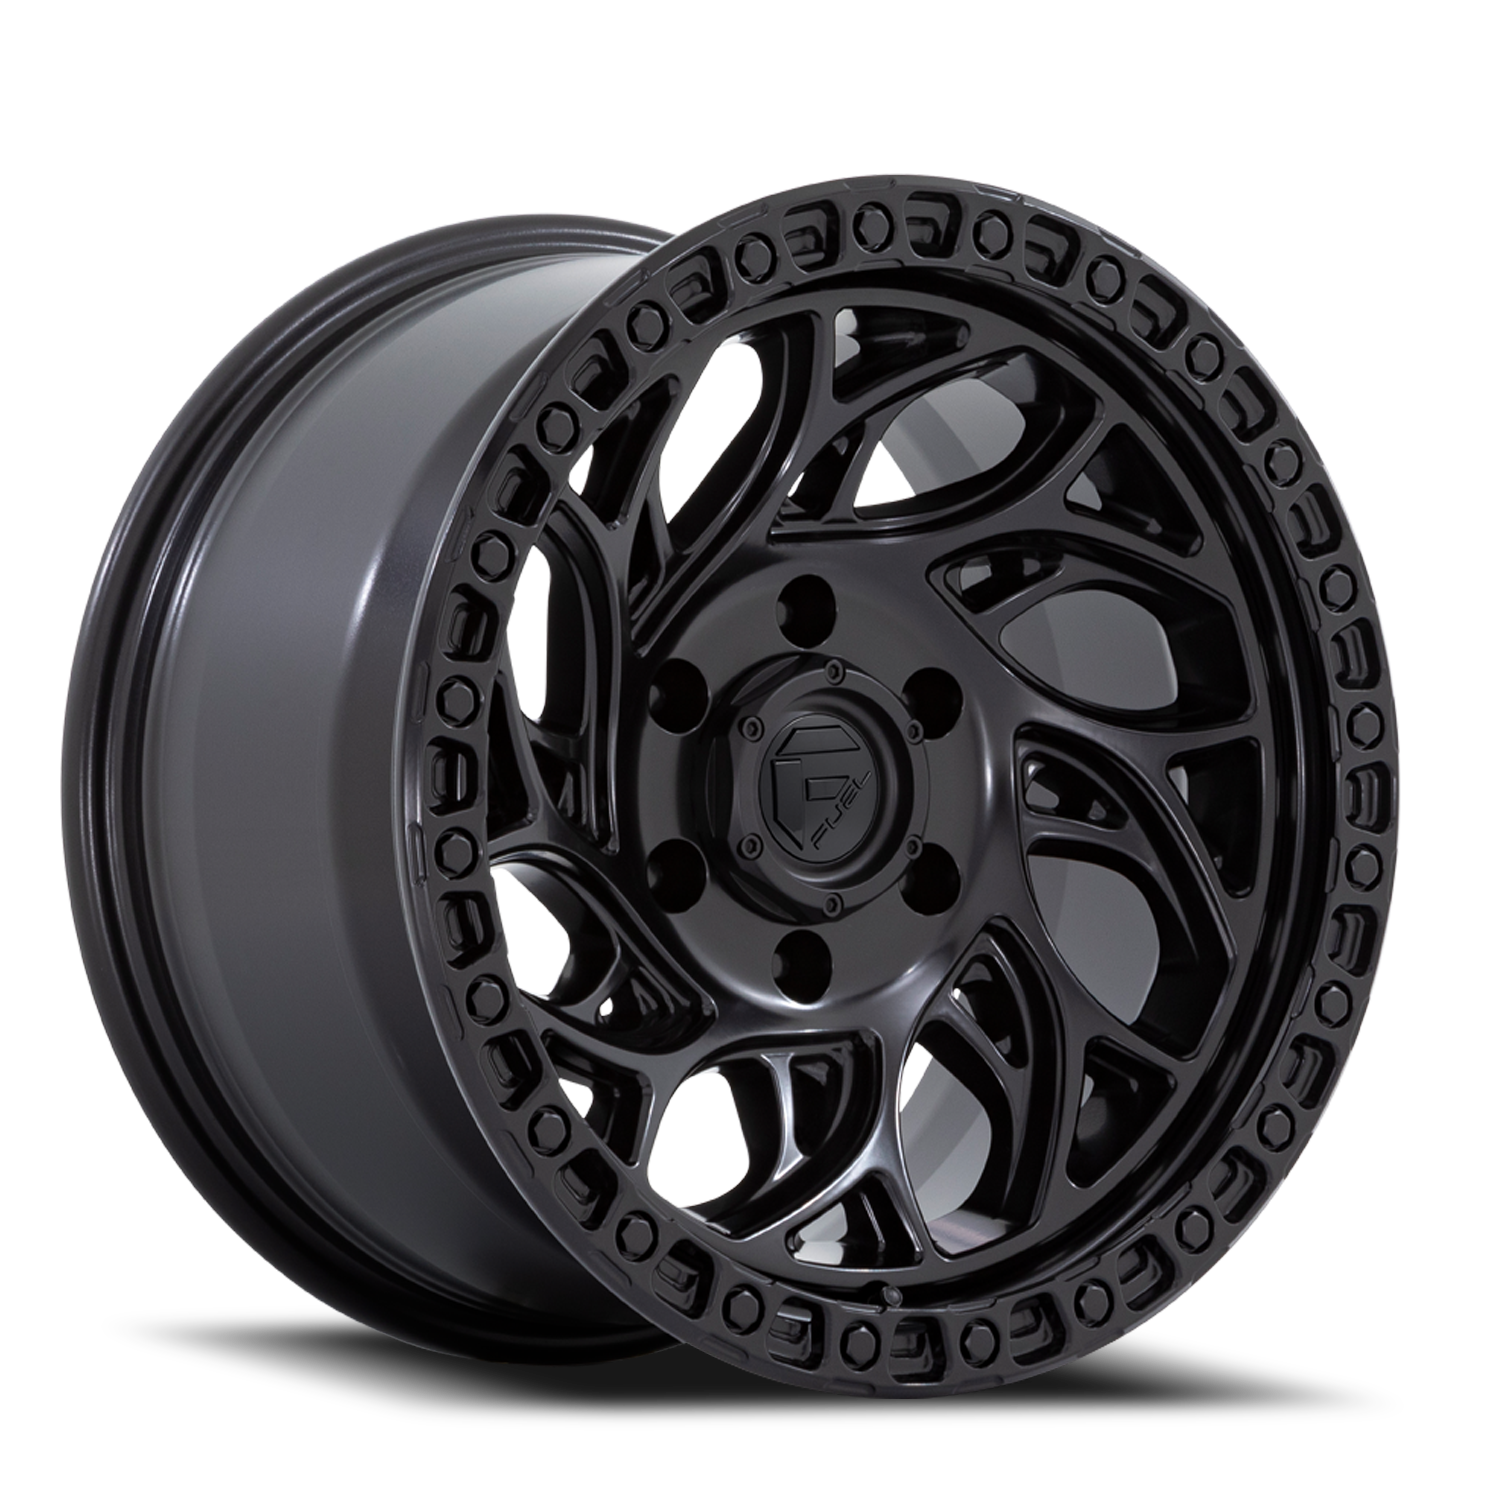 Aluminum Wheels 17X9 Runner OR D852 5 On 127 Blackout 71.5 Bore 1 Offset Fuel Off Road Wheels